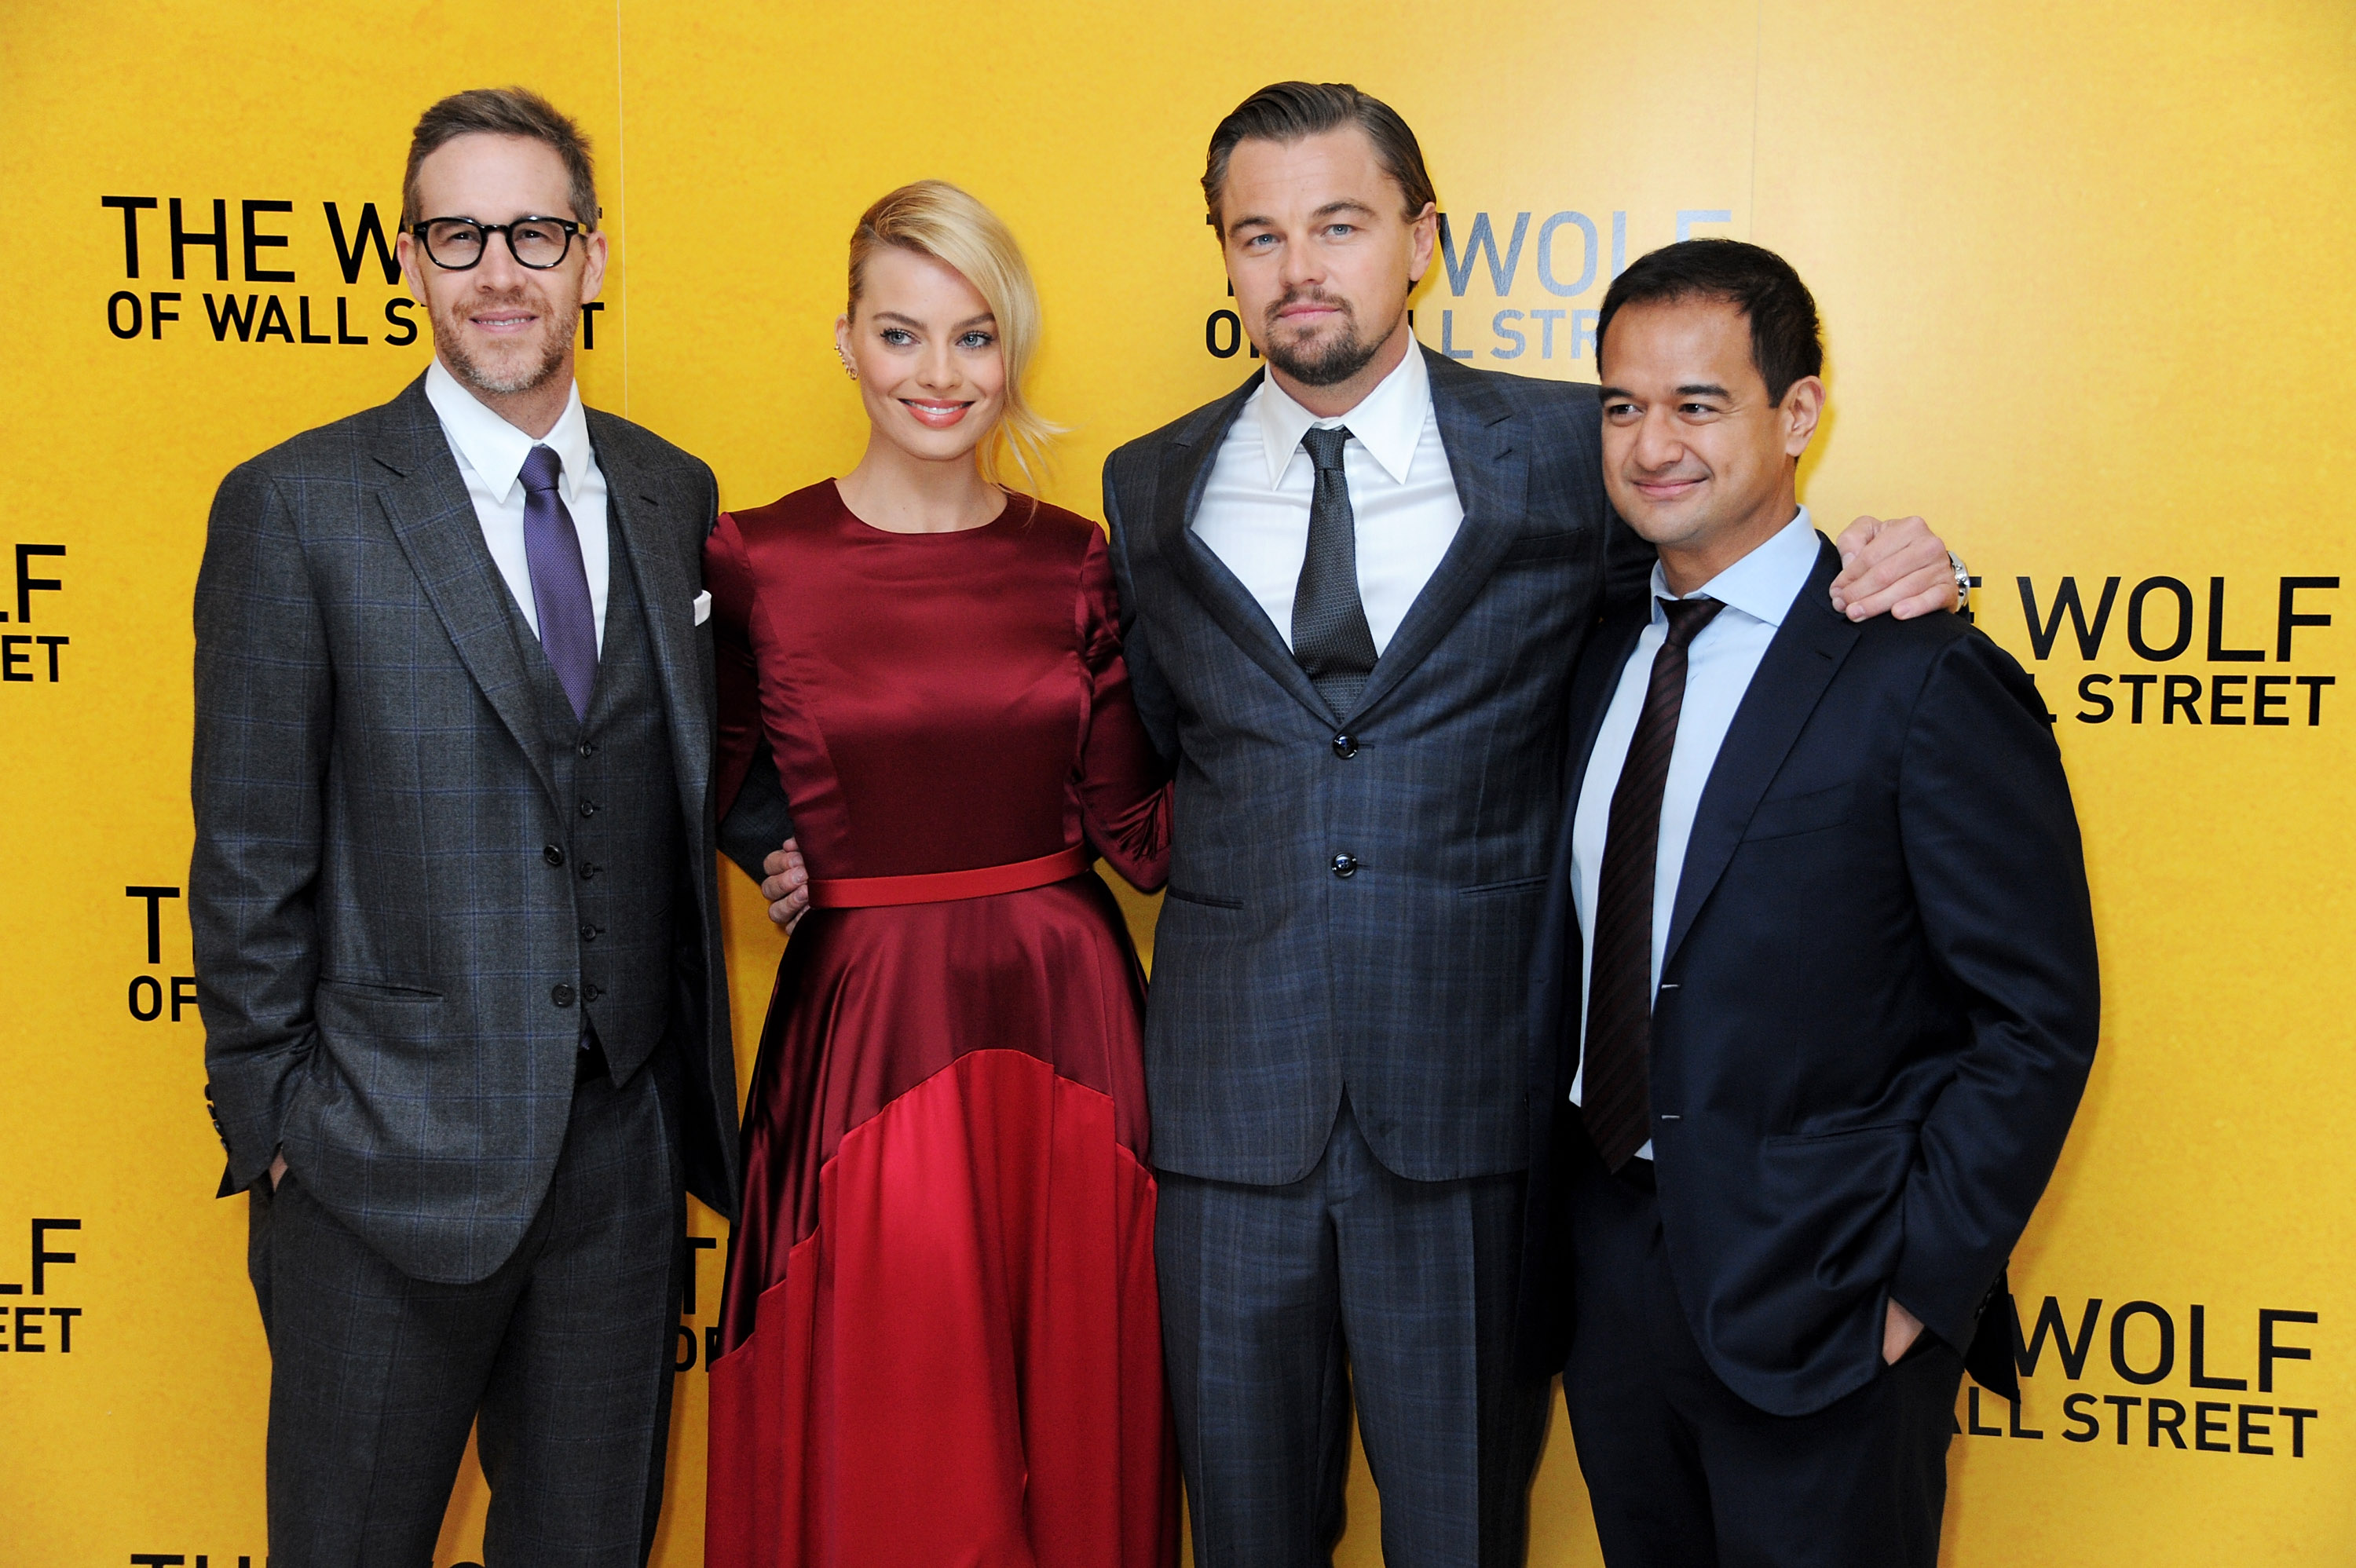 (R to L) Riza Aziz, Leonardo DiCaprio, Margot Robbie and producer Joey McFarland attend the U.K. Premiere of "The Wolf Of Wall Street" on Jan. 9, 2014 in London. (Dave M. Benett—WireImage/Getty Images)